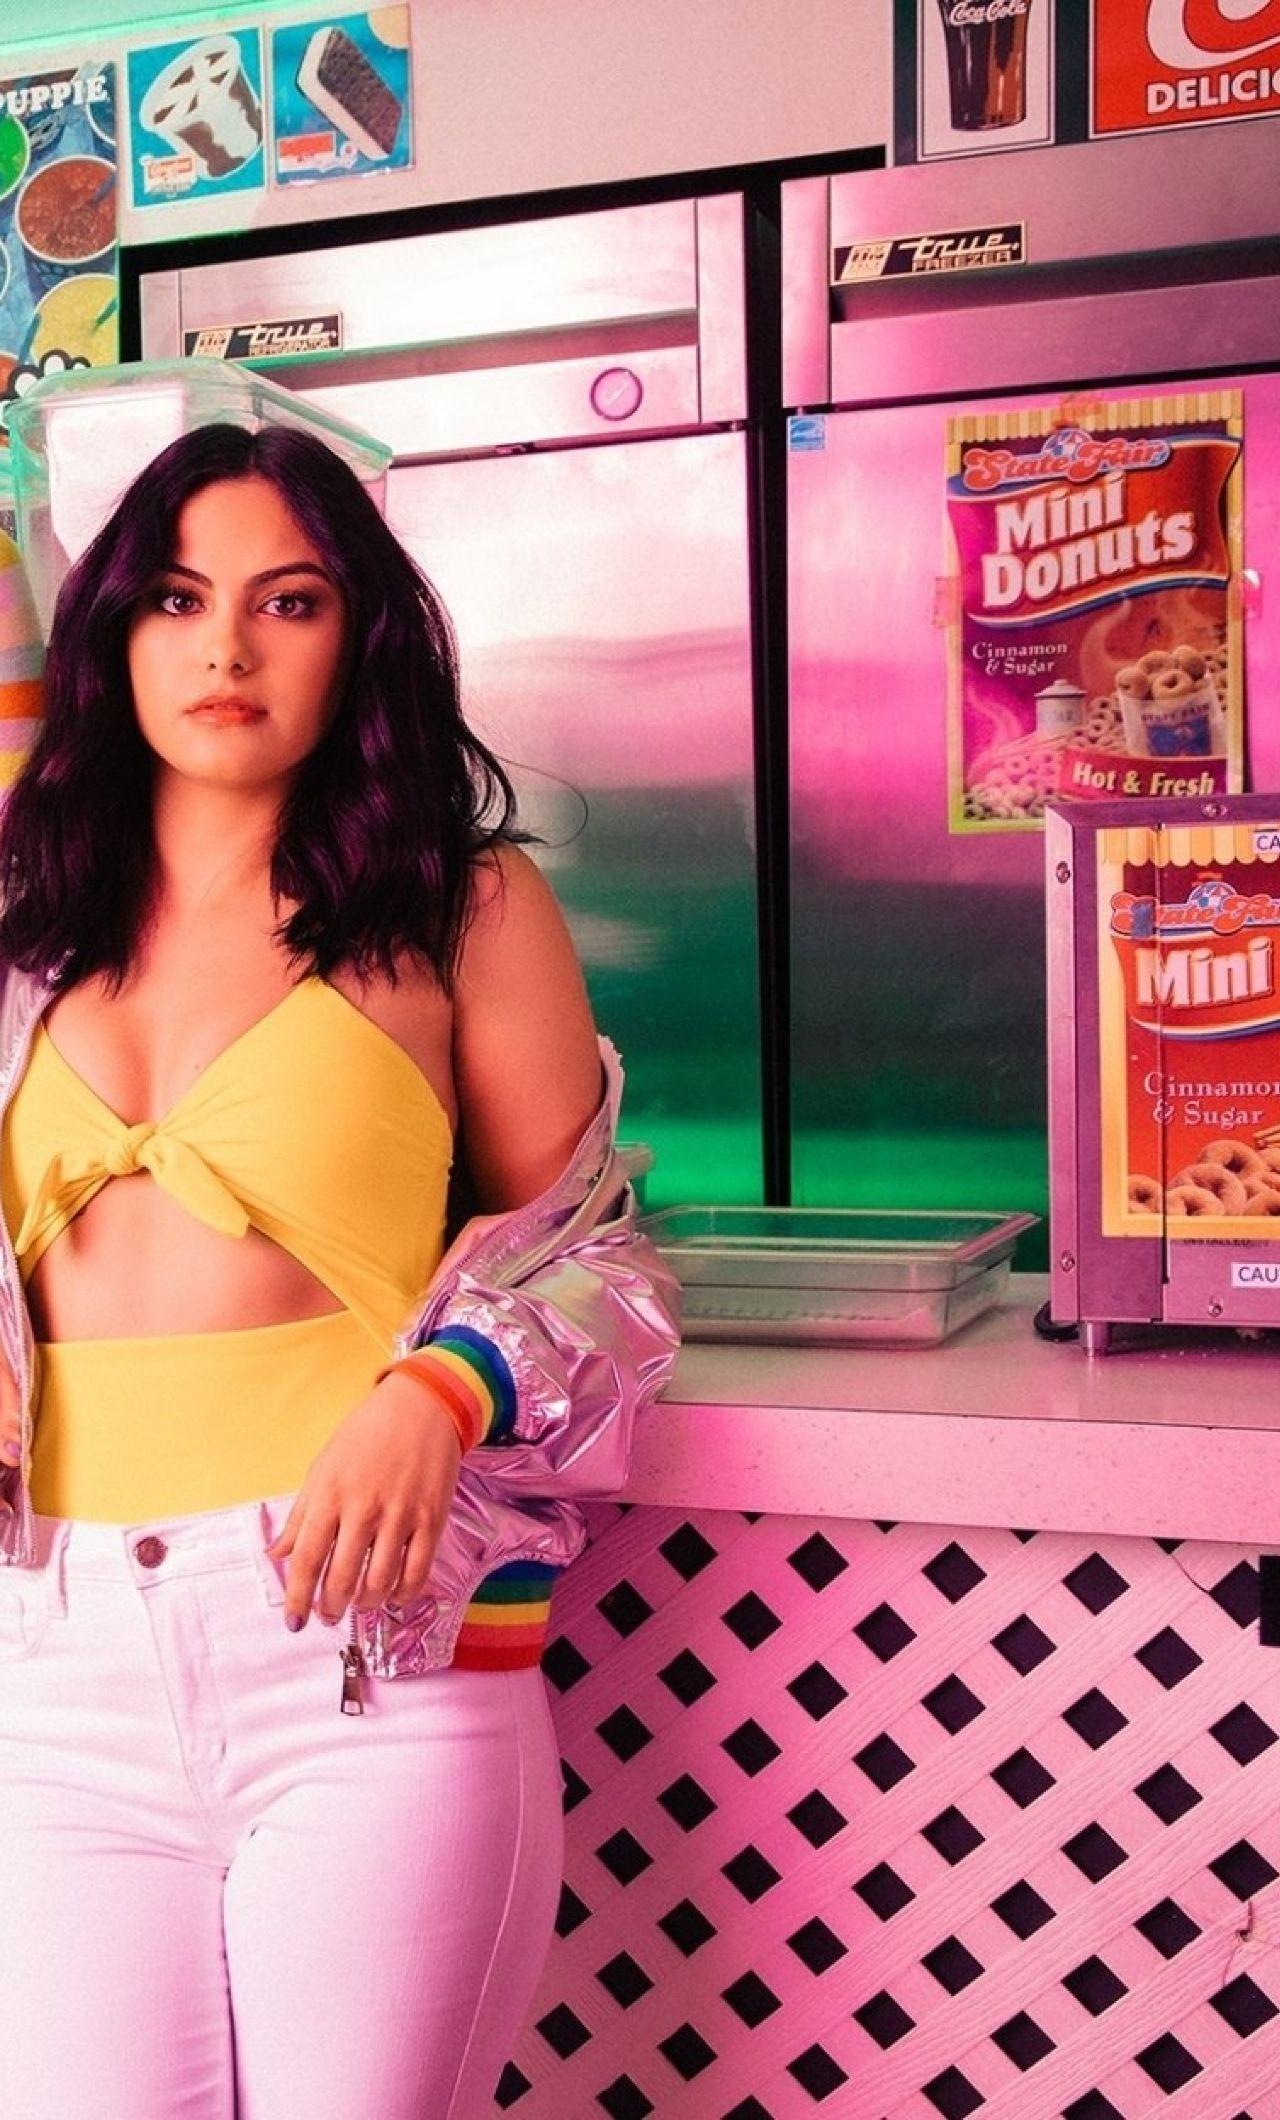 Camila Mendes And Lili Reinhart From Riverdale, Full HD Wallpaper